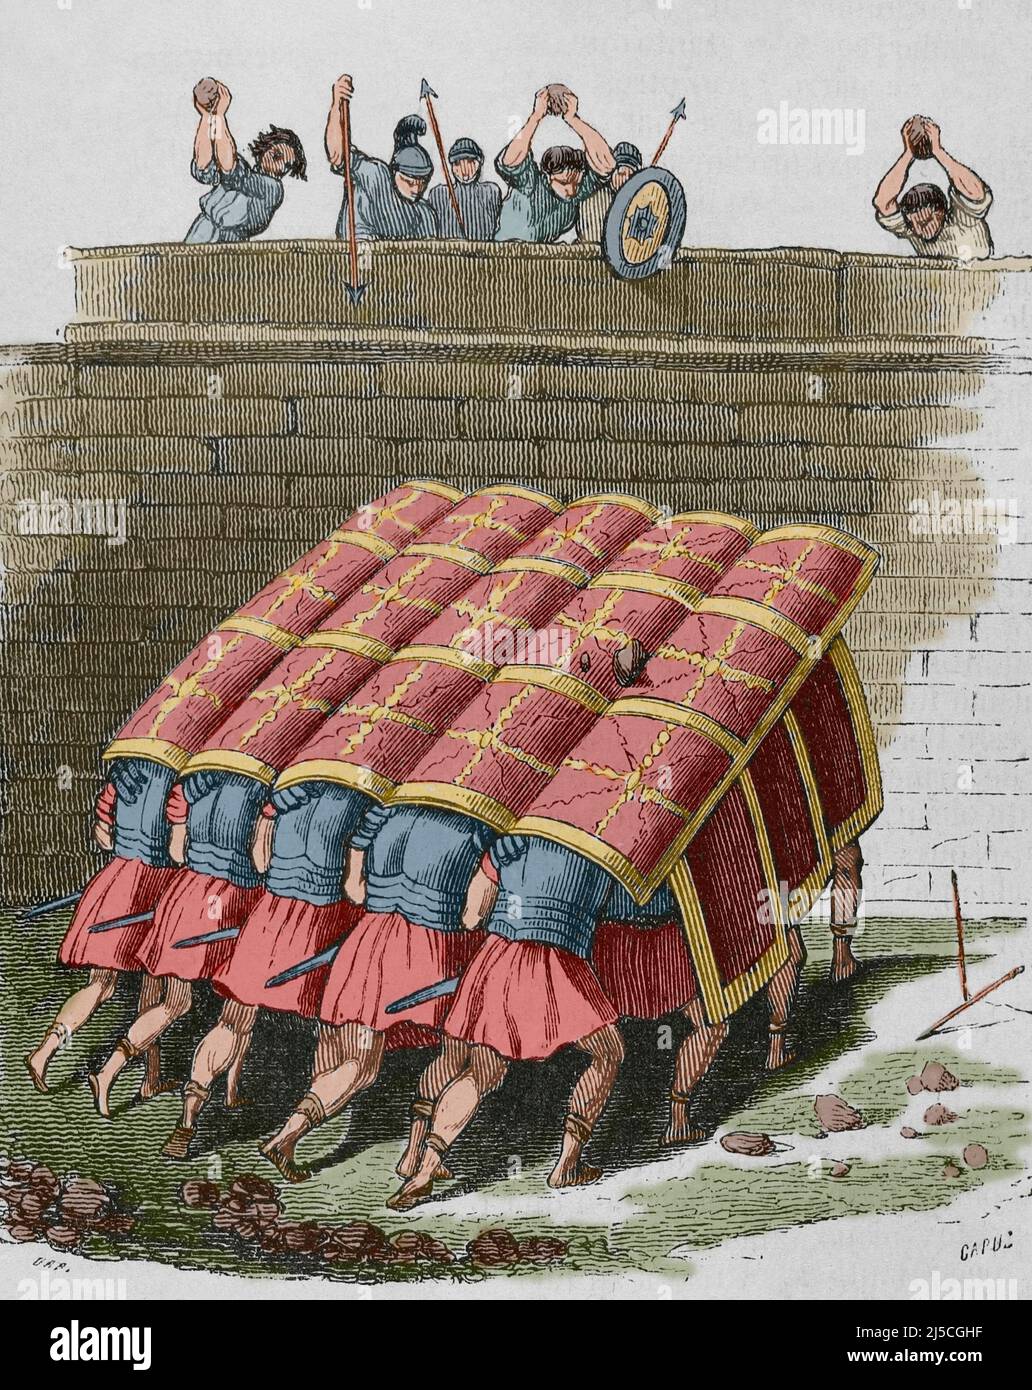 Roman Empire. Roman legions in the testudo or tortoise formation. Engraving by Capuz. Later colouration. Historia General de España by Father Mariana. Madrid, 1852. Stock Photo